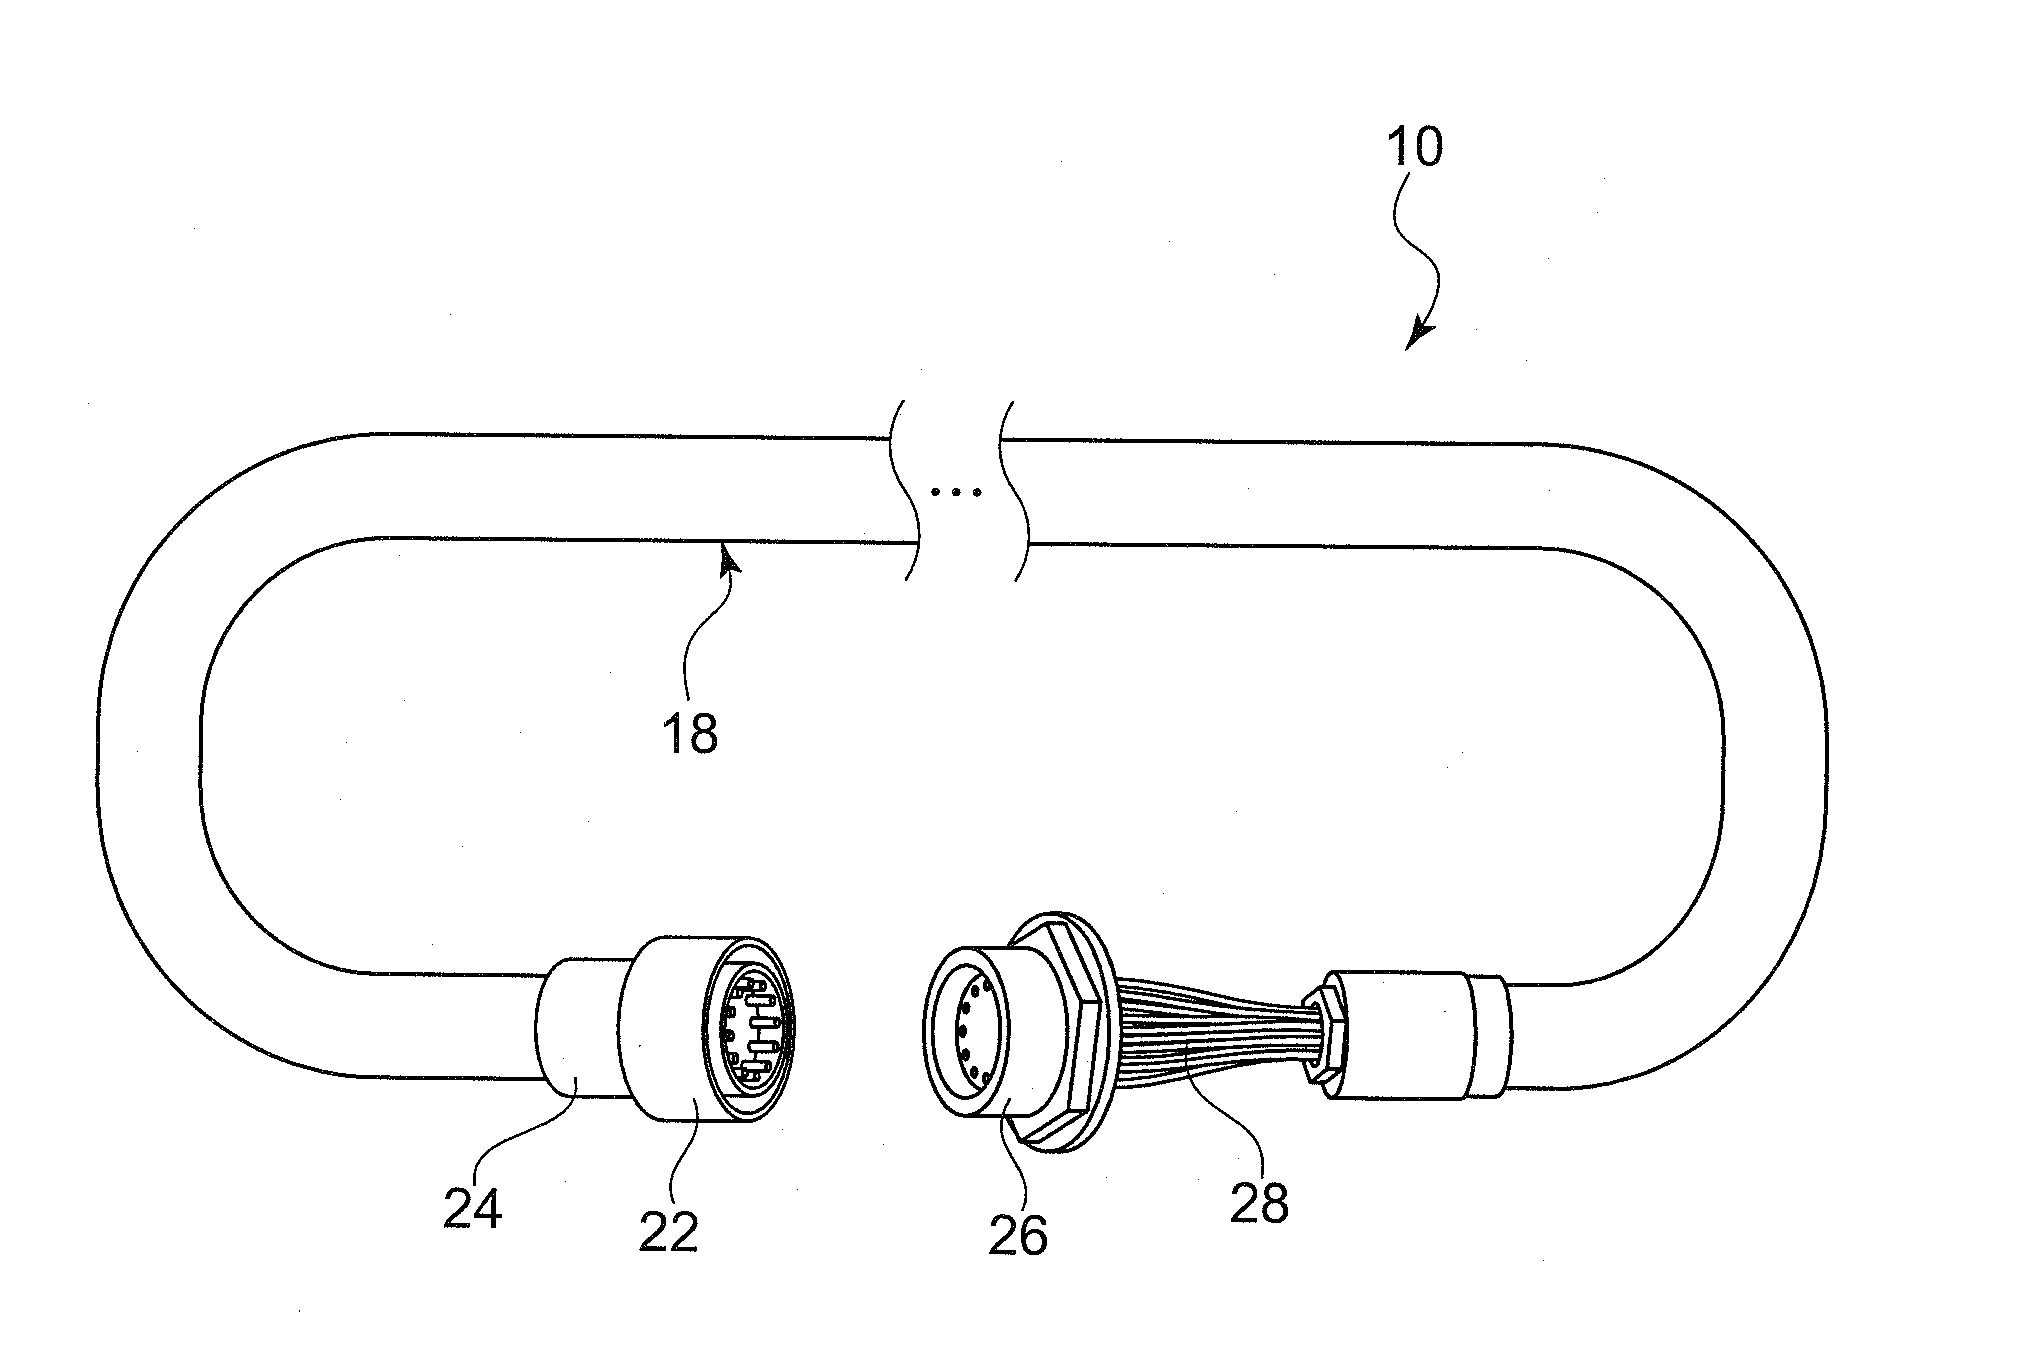 Method and apparatus for communicating between a cab and chassis of a truck